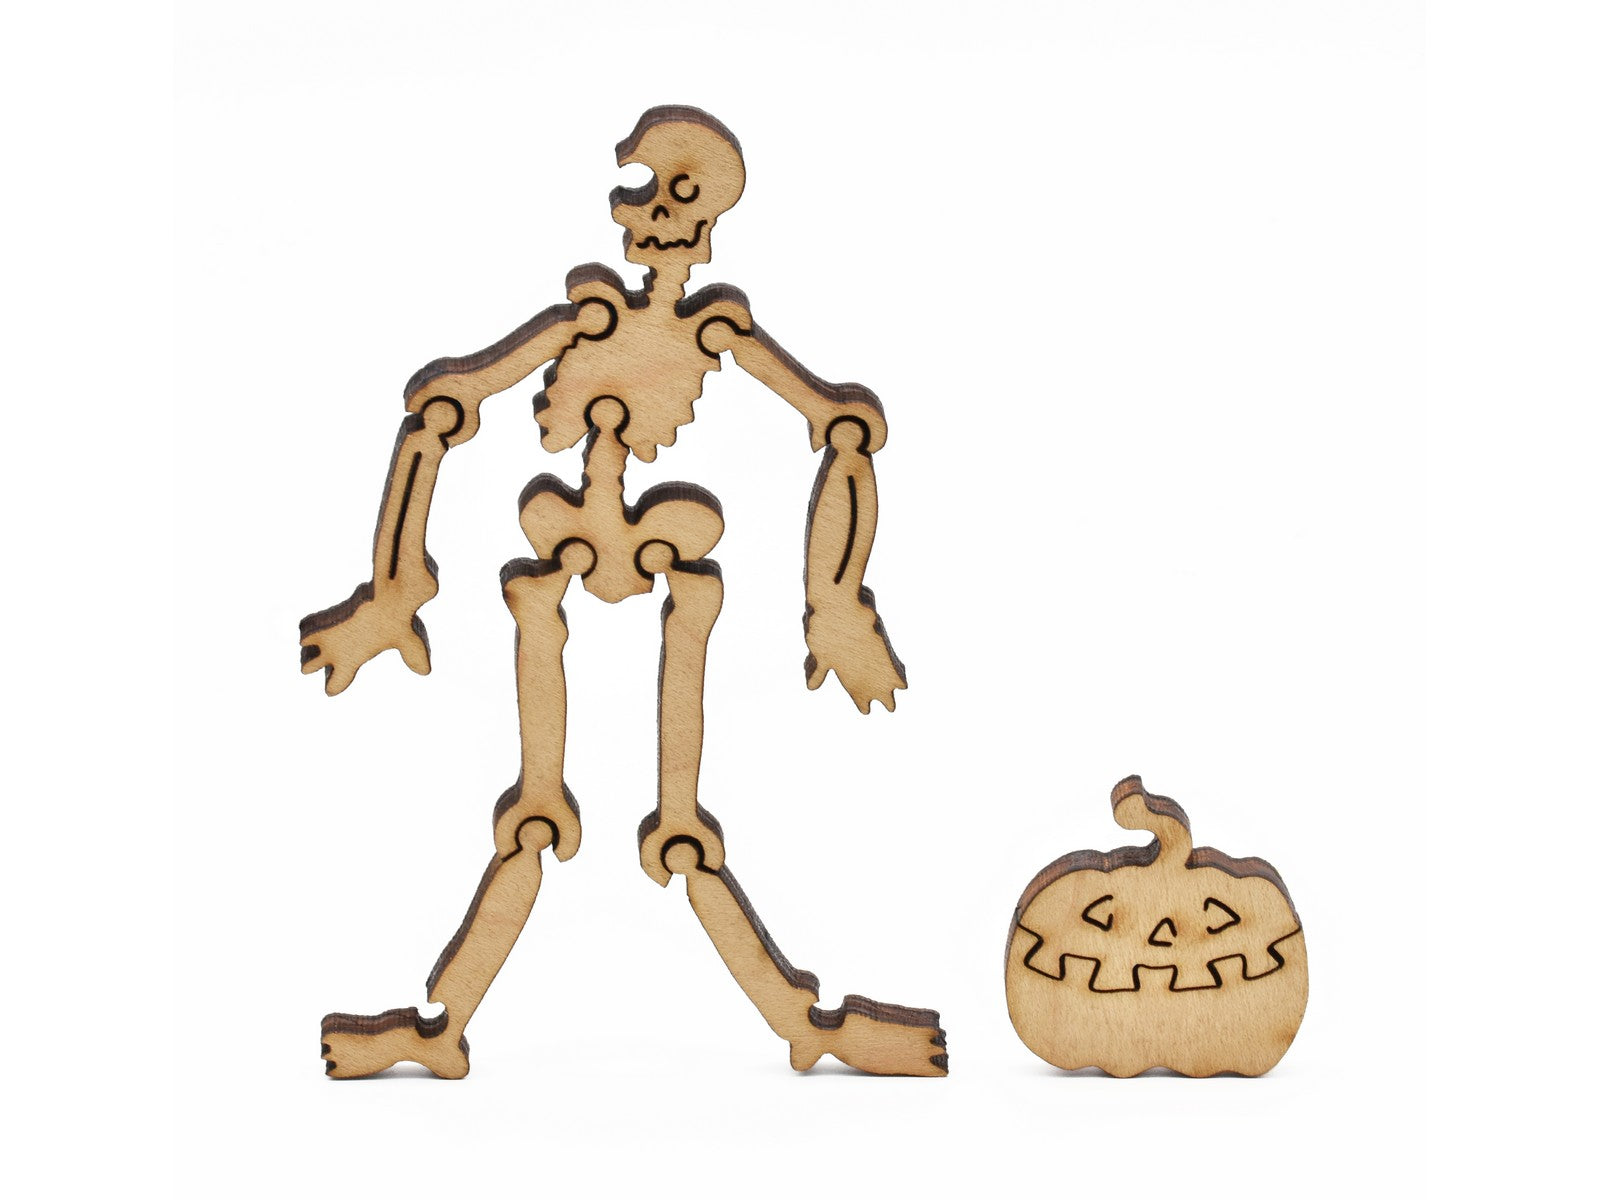 A closeup of pieces in the shape of a skeleton and a jack-o-lantern.